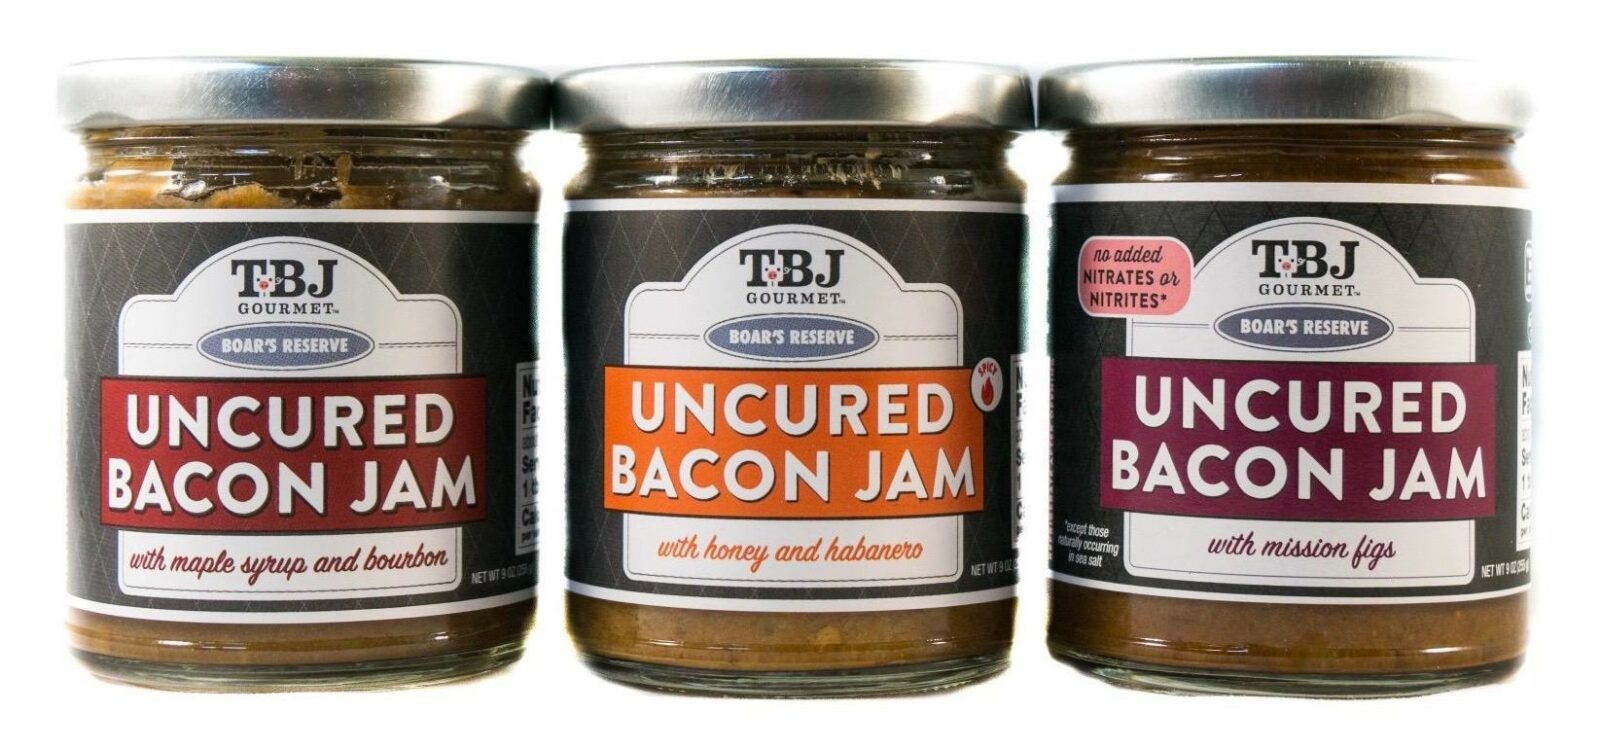 TBJ Gourmet Bacon Jam: You’ll Want to Put This on Everything